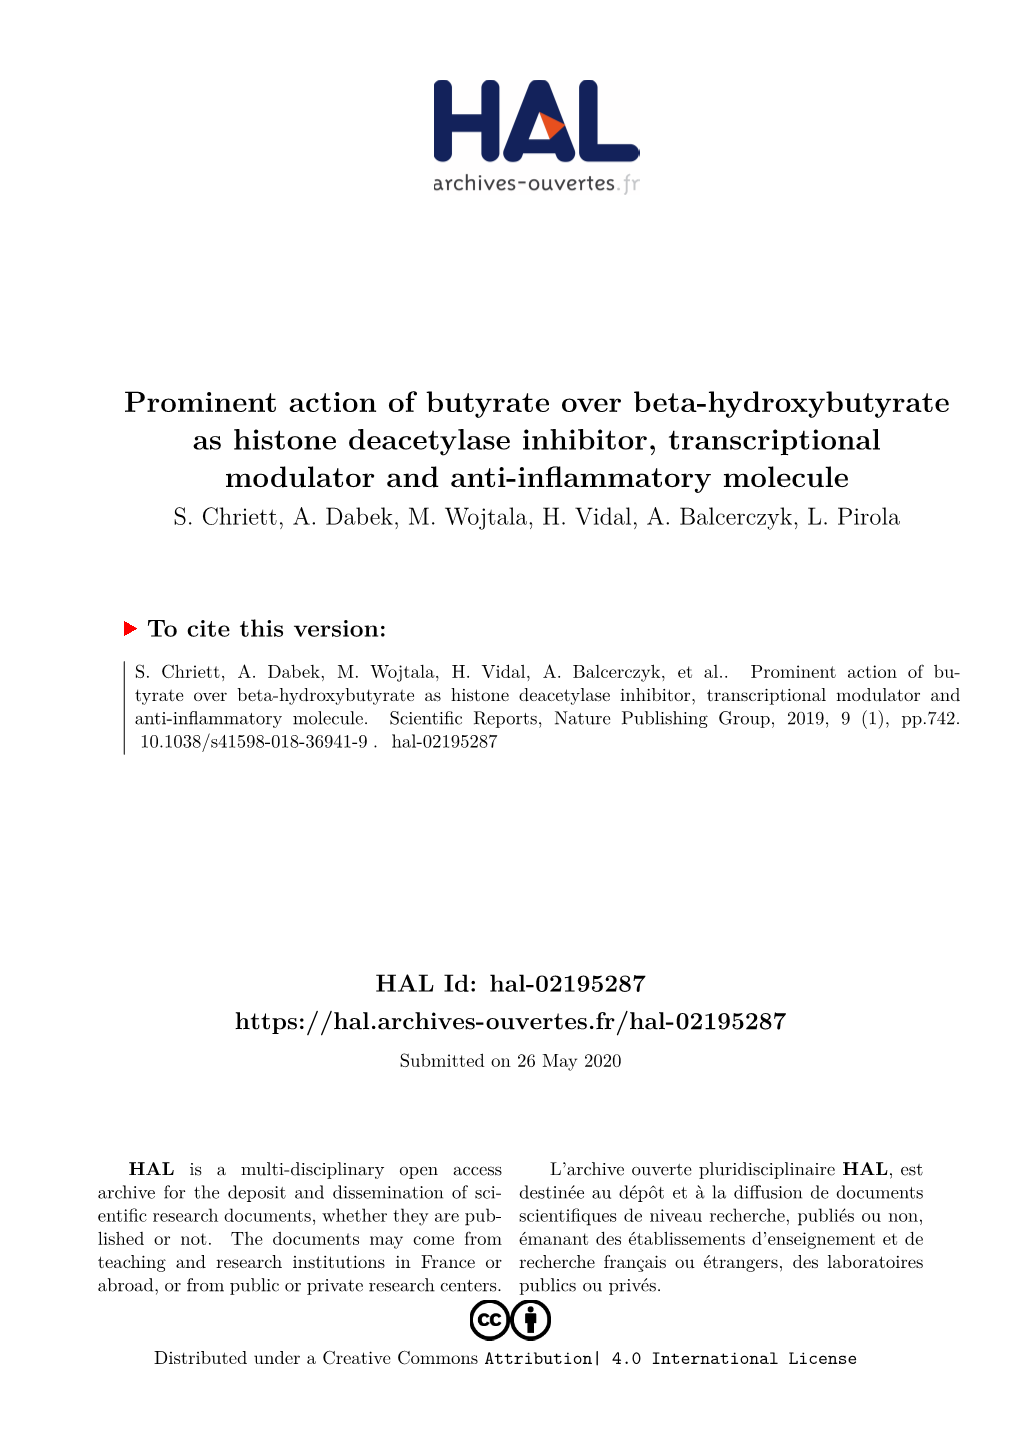 Prominent Action of Butyrate Over Beta-Hydroxybutyrate As Histone Deacetylase Inhibitor, Transcriptional Modulator and Anti-Inflammatory Molecule S